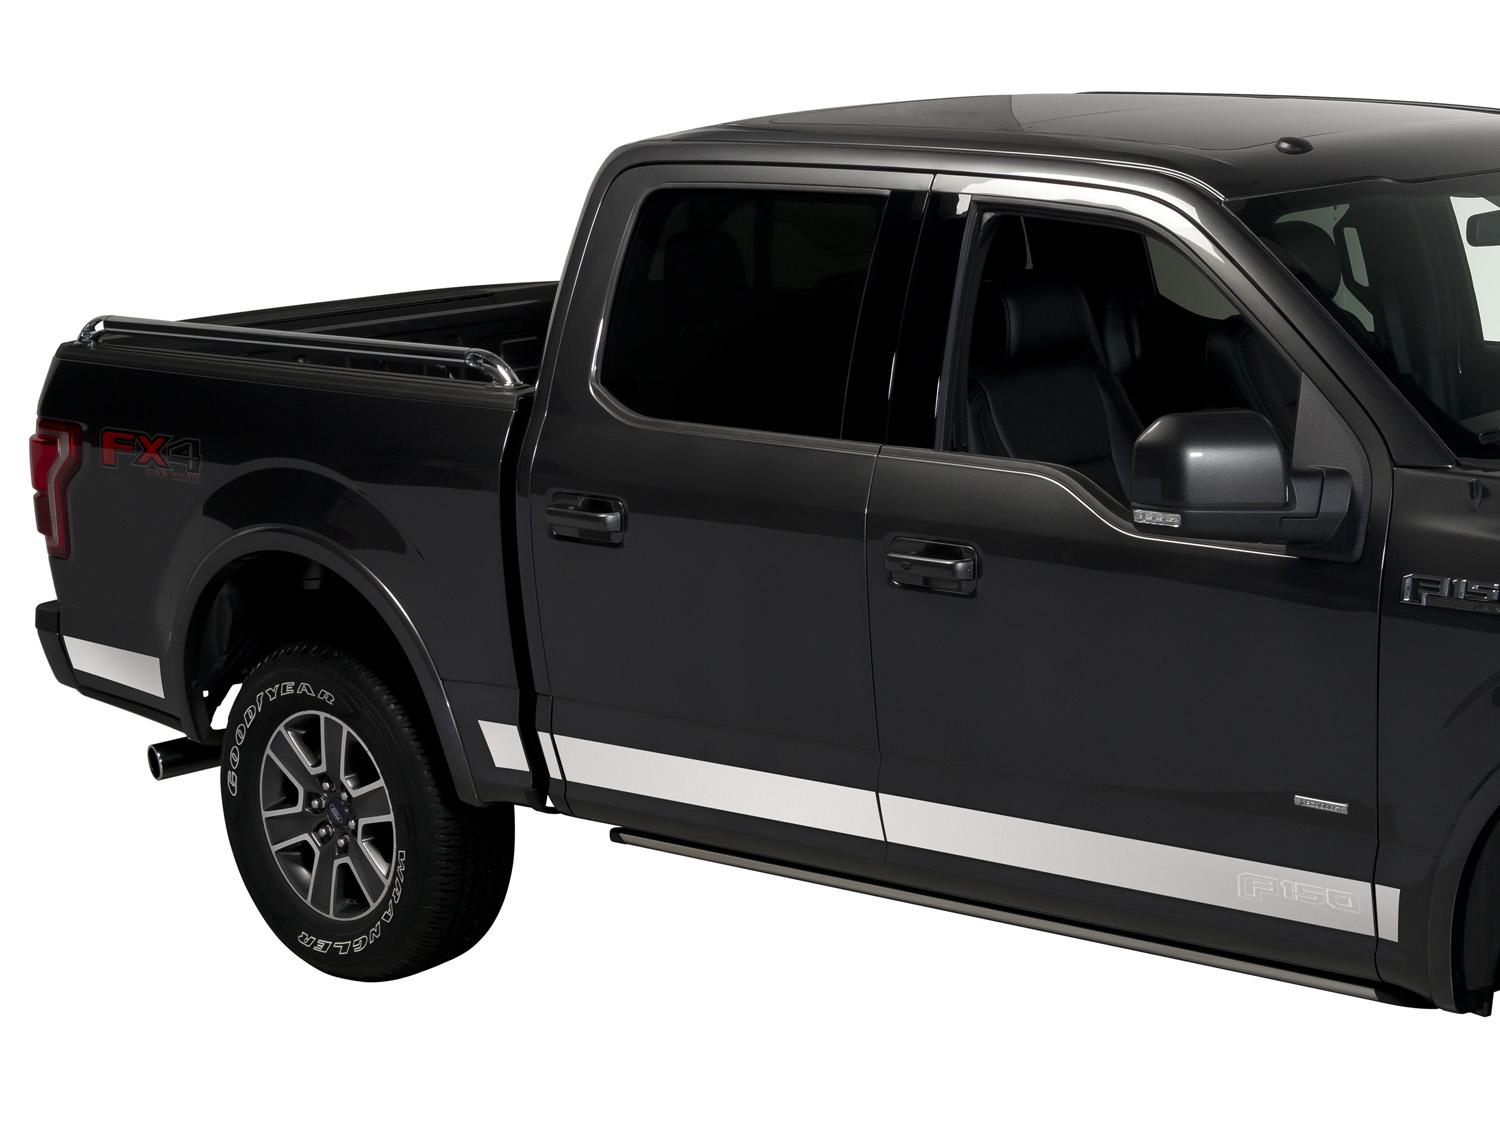 Image for Exterior Trim Kit - Body Side Moldings, Black Platinum, SuperCrew  5.5 bed from AccessoriesCanada